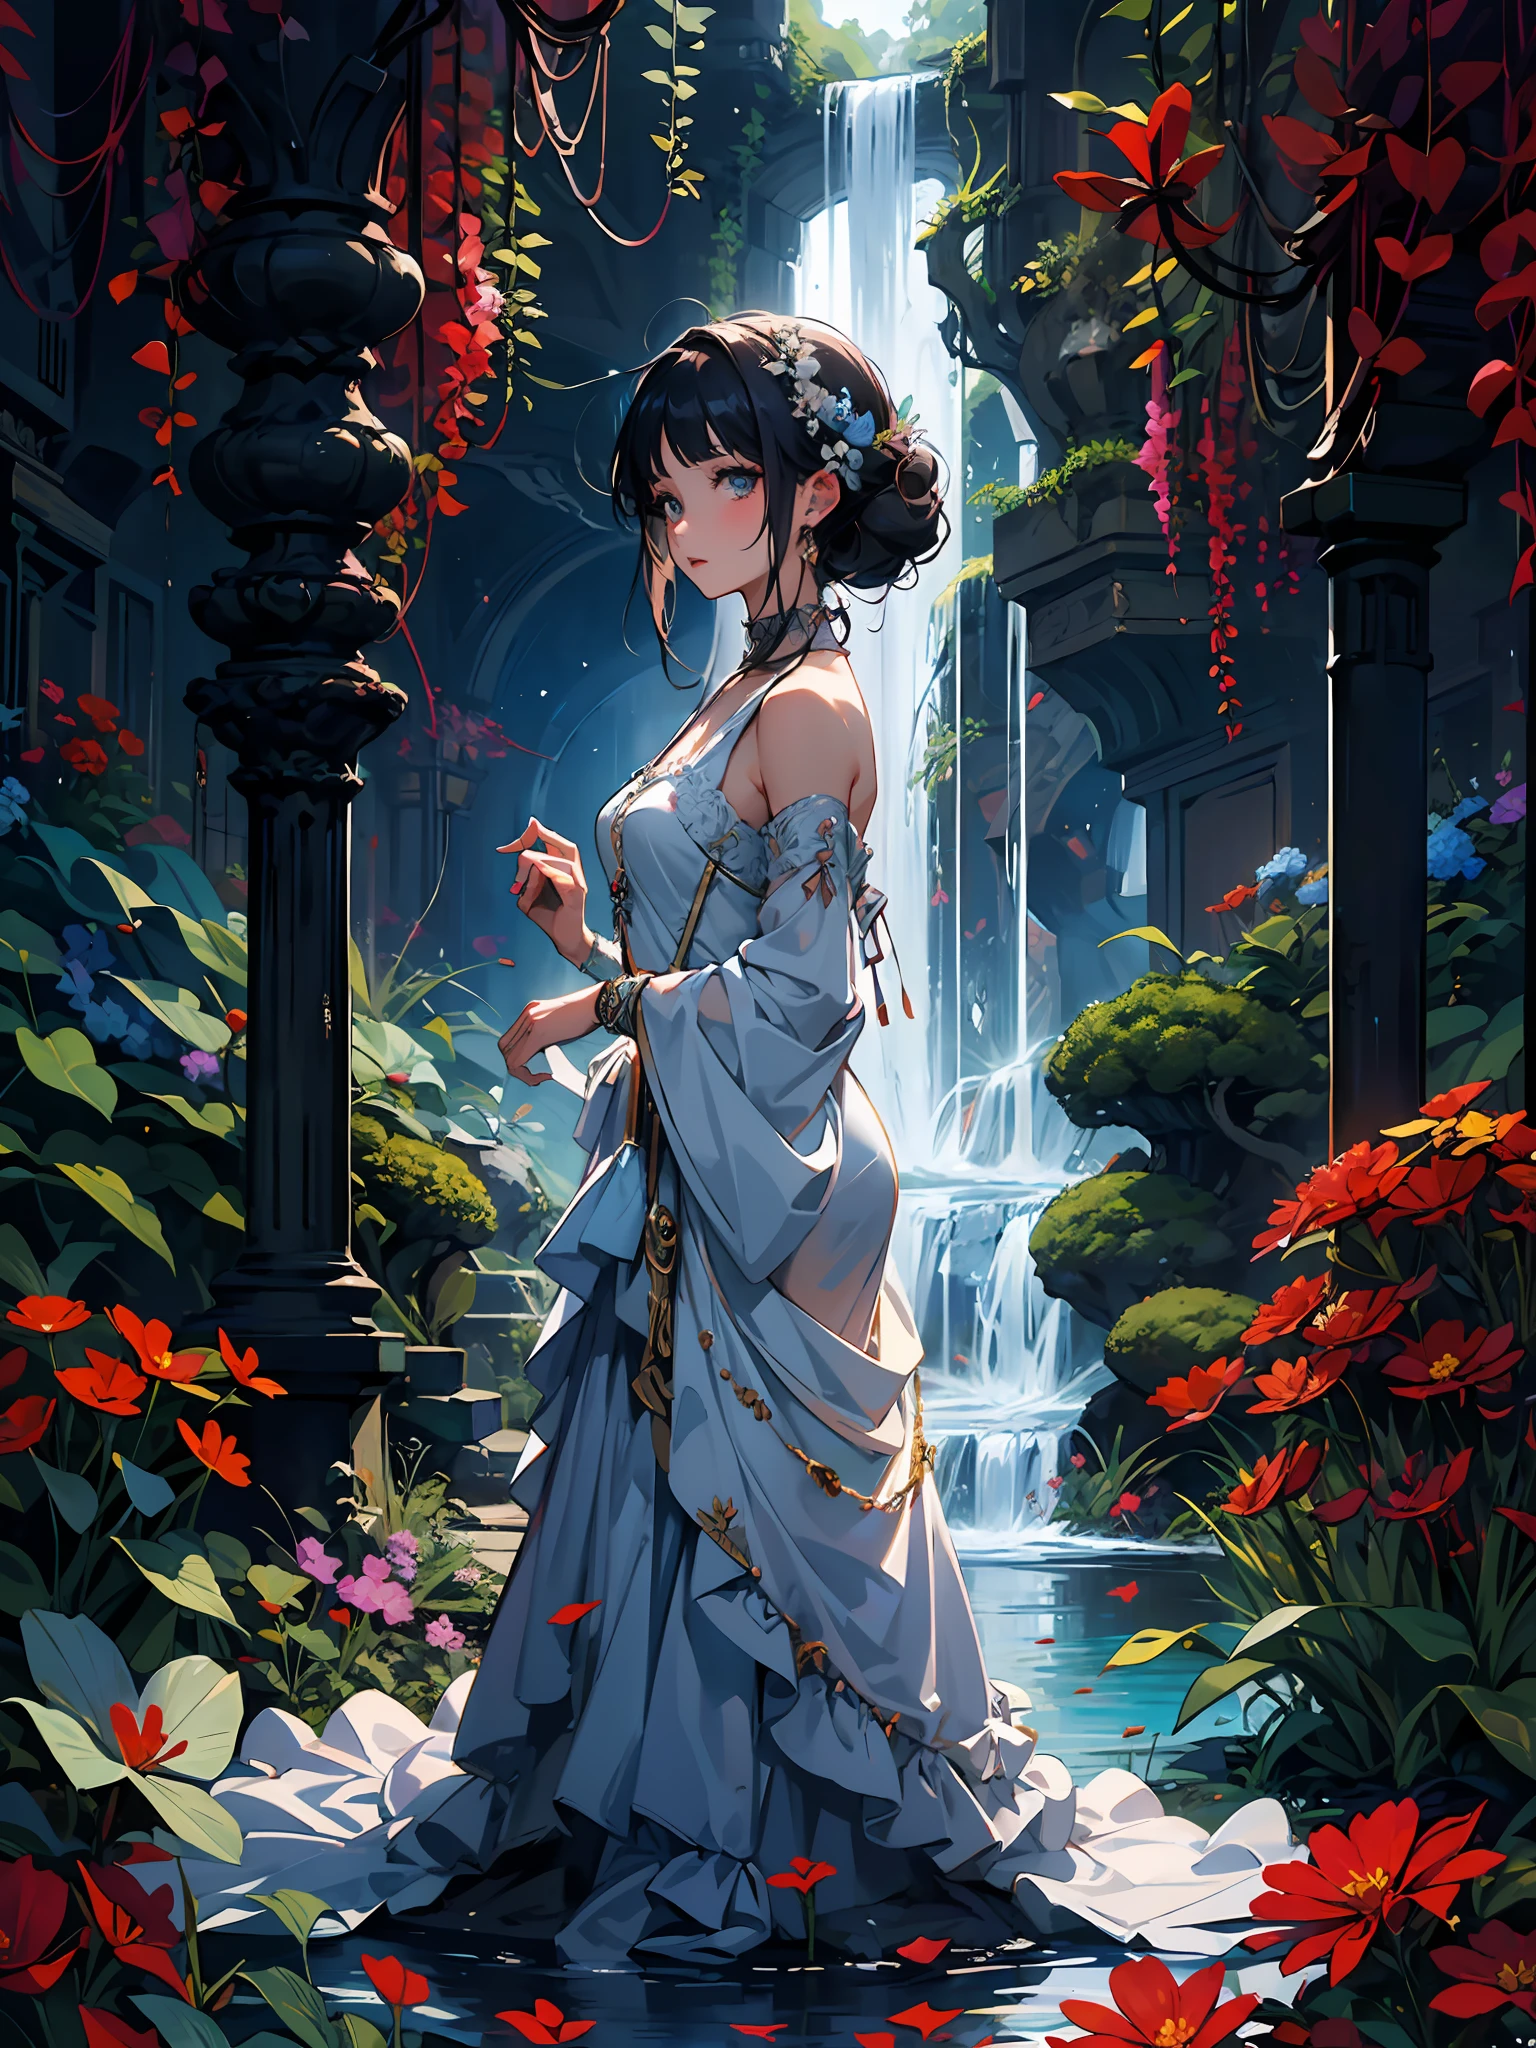 Em um reino oculto, a girl stands before a cascading waterfall, seu traje se mistura perfeitamente com a beleza da natureza. A flowing gown adorned with delicate floral patterns drapes around her, espelhando as flores vibrantes que adornam a paisagem circundante. Sunlight dances on the water's surface, casting an ethereal glow upon her face, as if she is the embodiment of the enchantment that permeates this mystical haven.